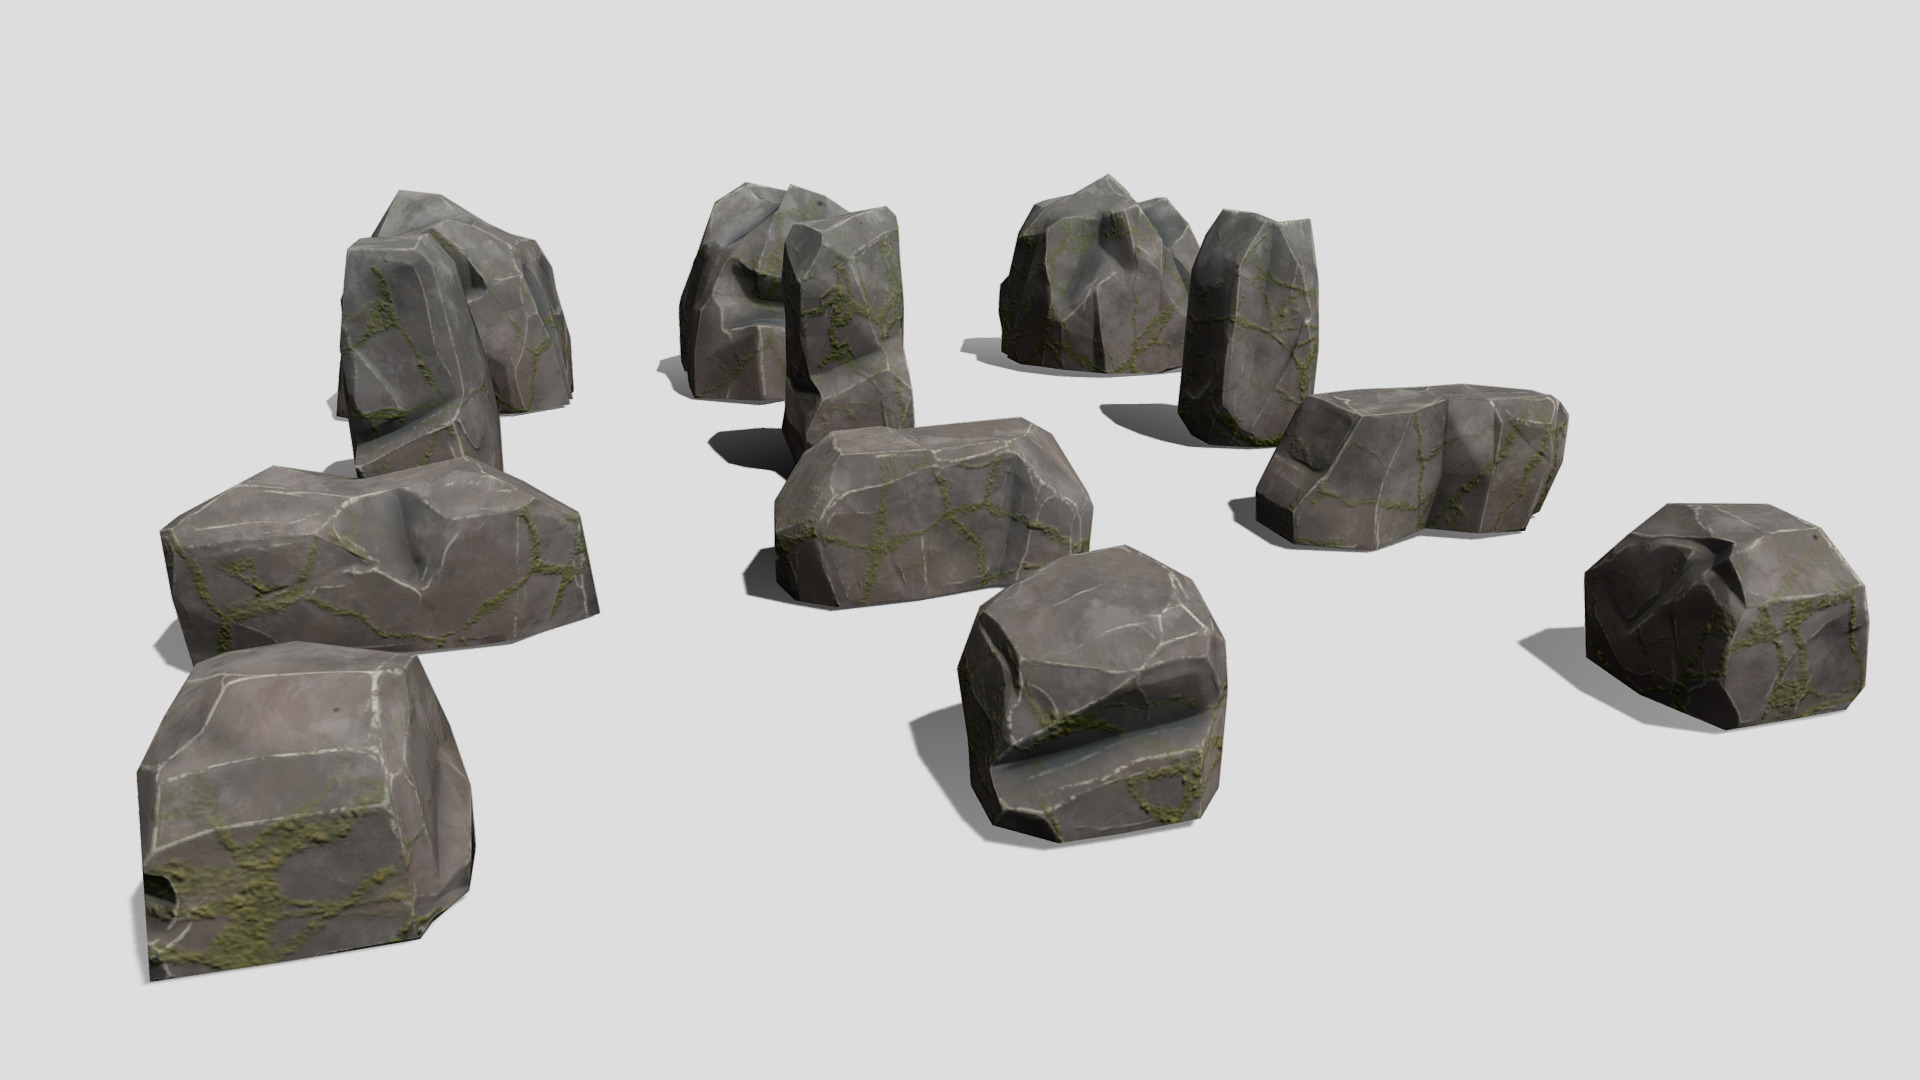 3D model Stones - This is a 3D model of the Stones. The 3D model is about a group of rocks.